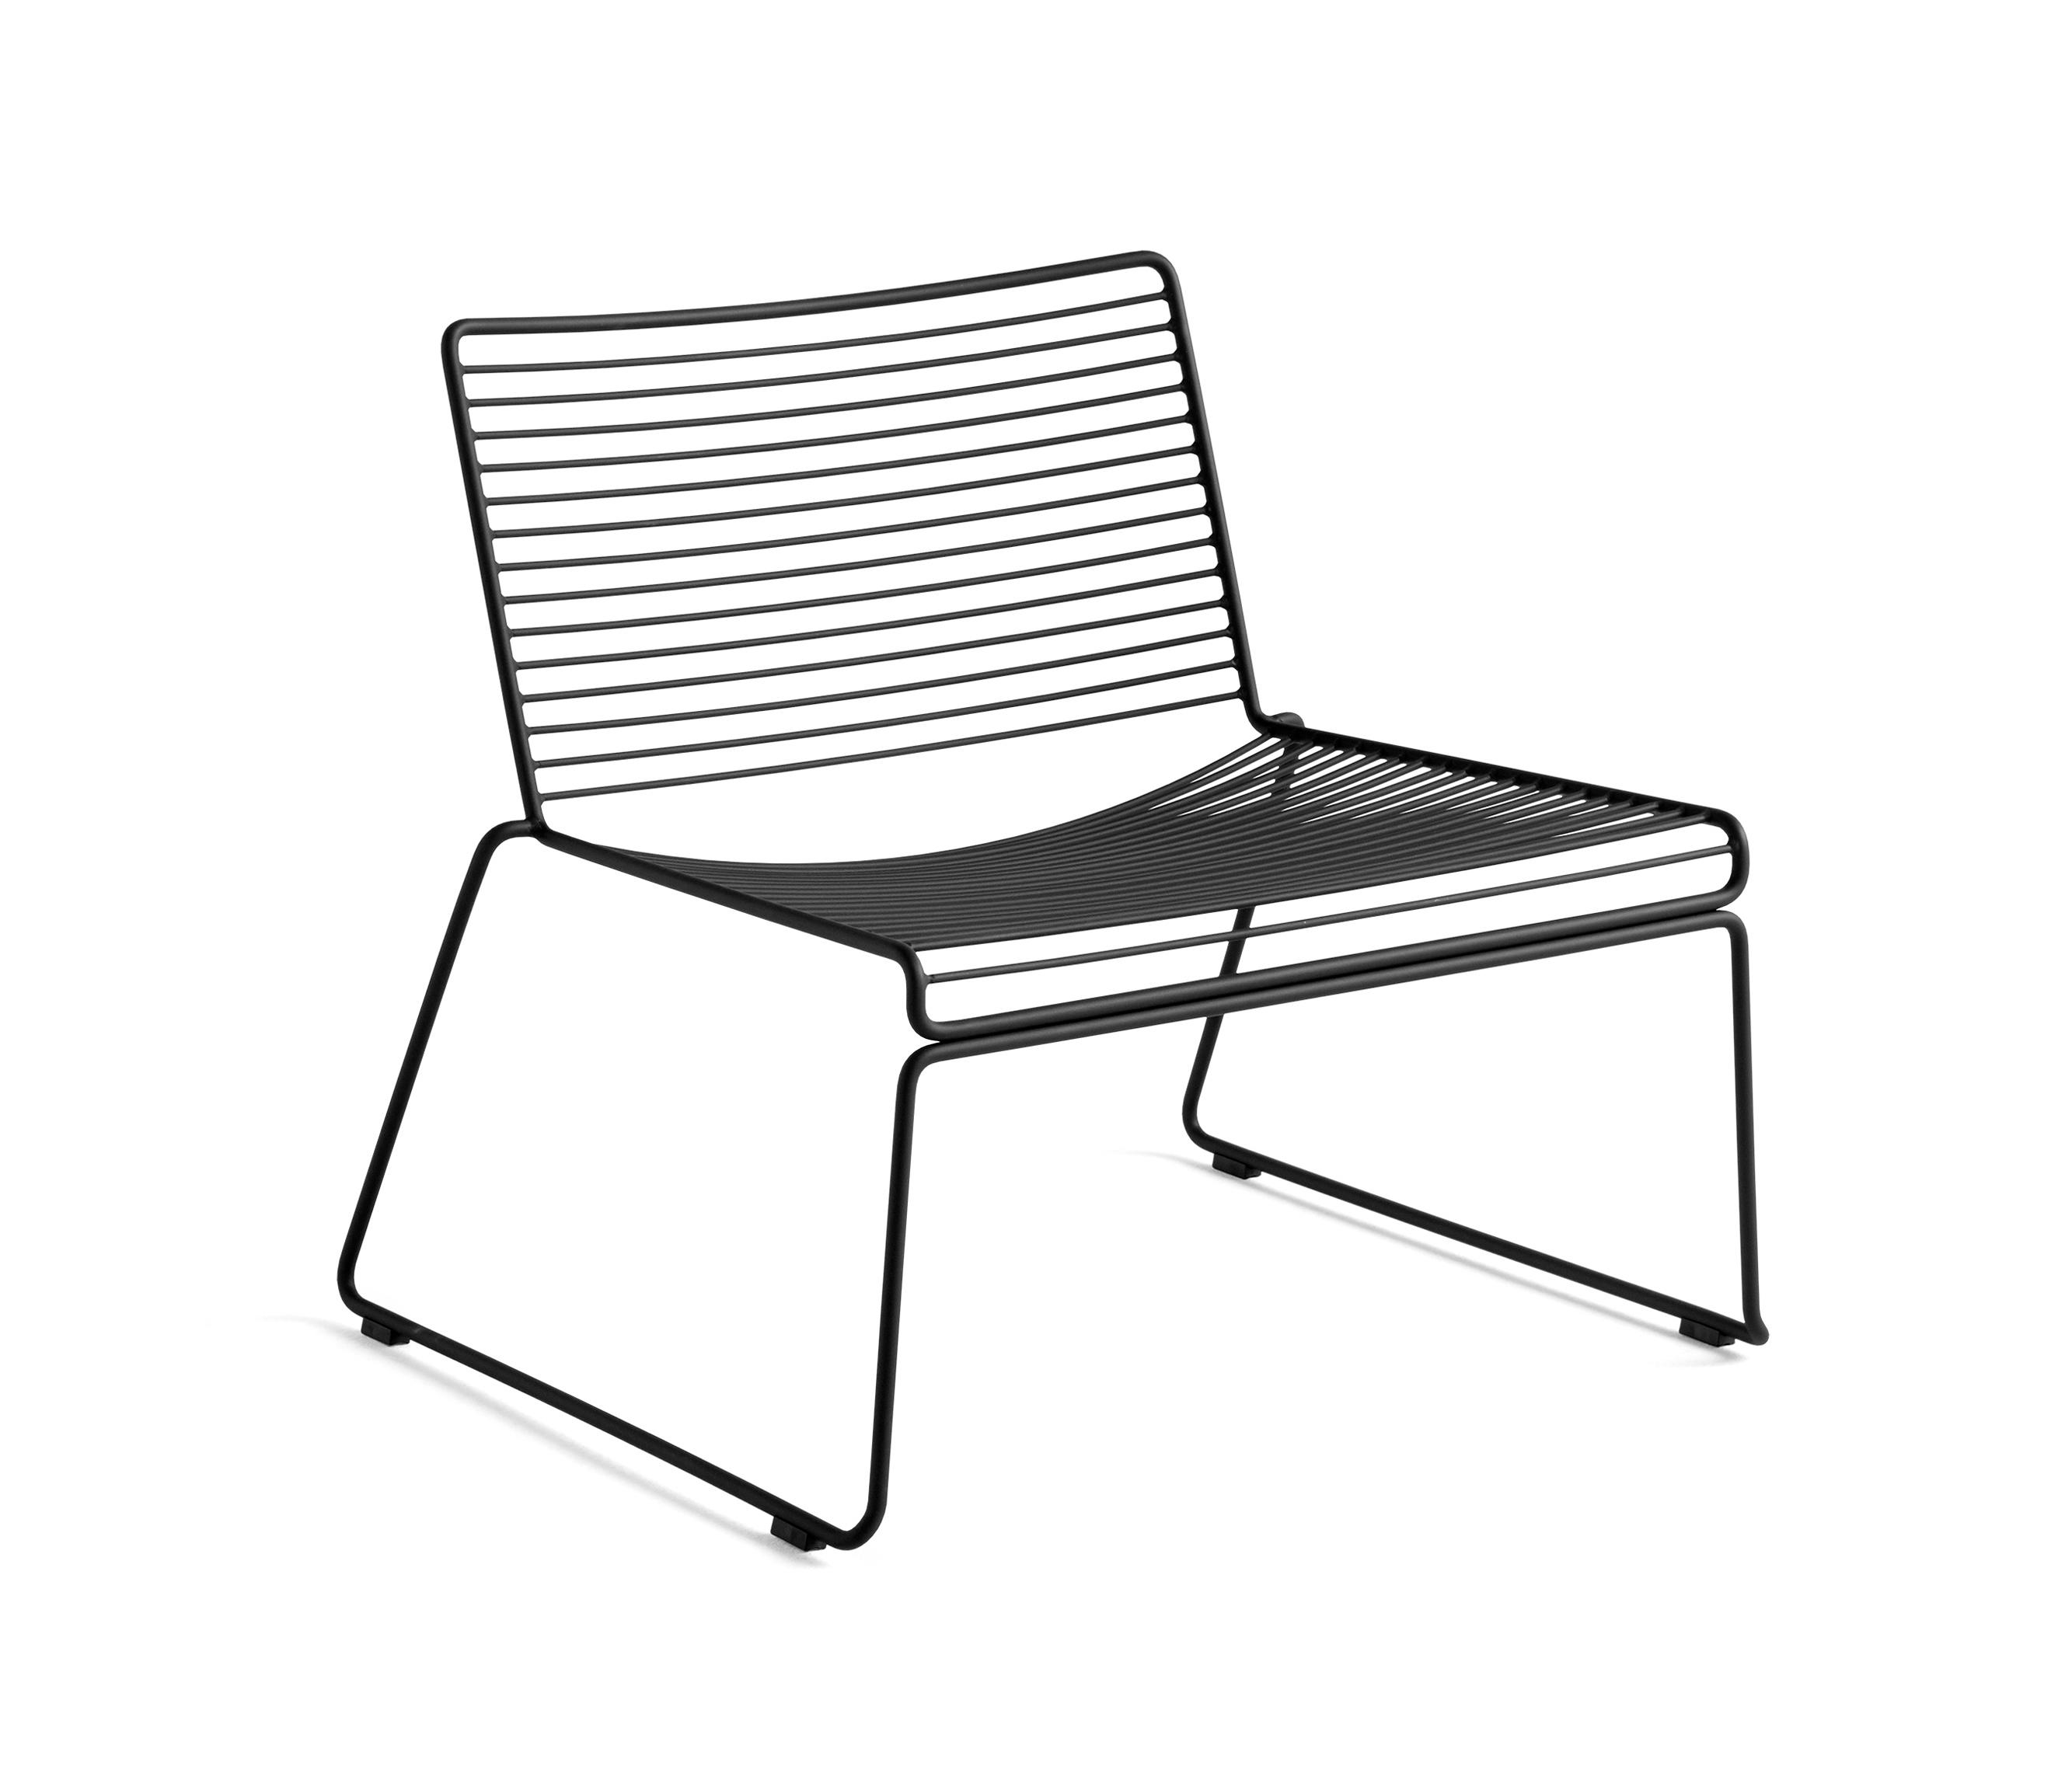 Hee Lounge Chair & designer furniture | Architonic